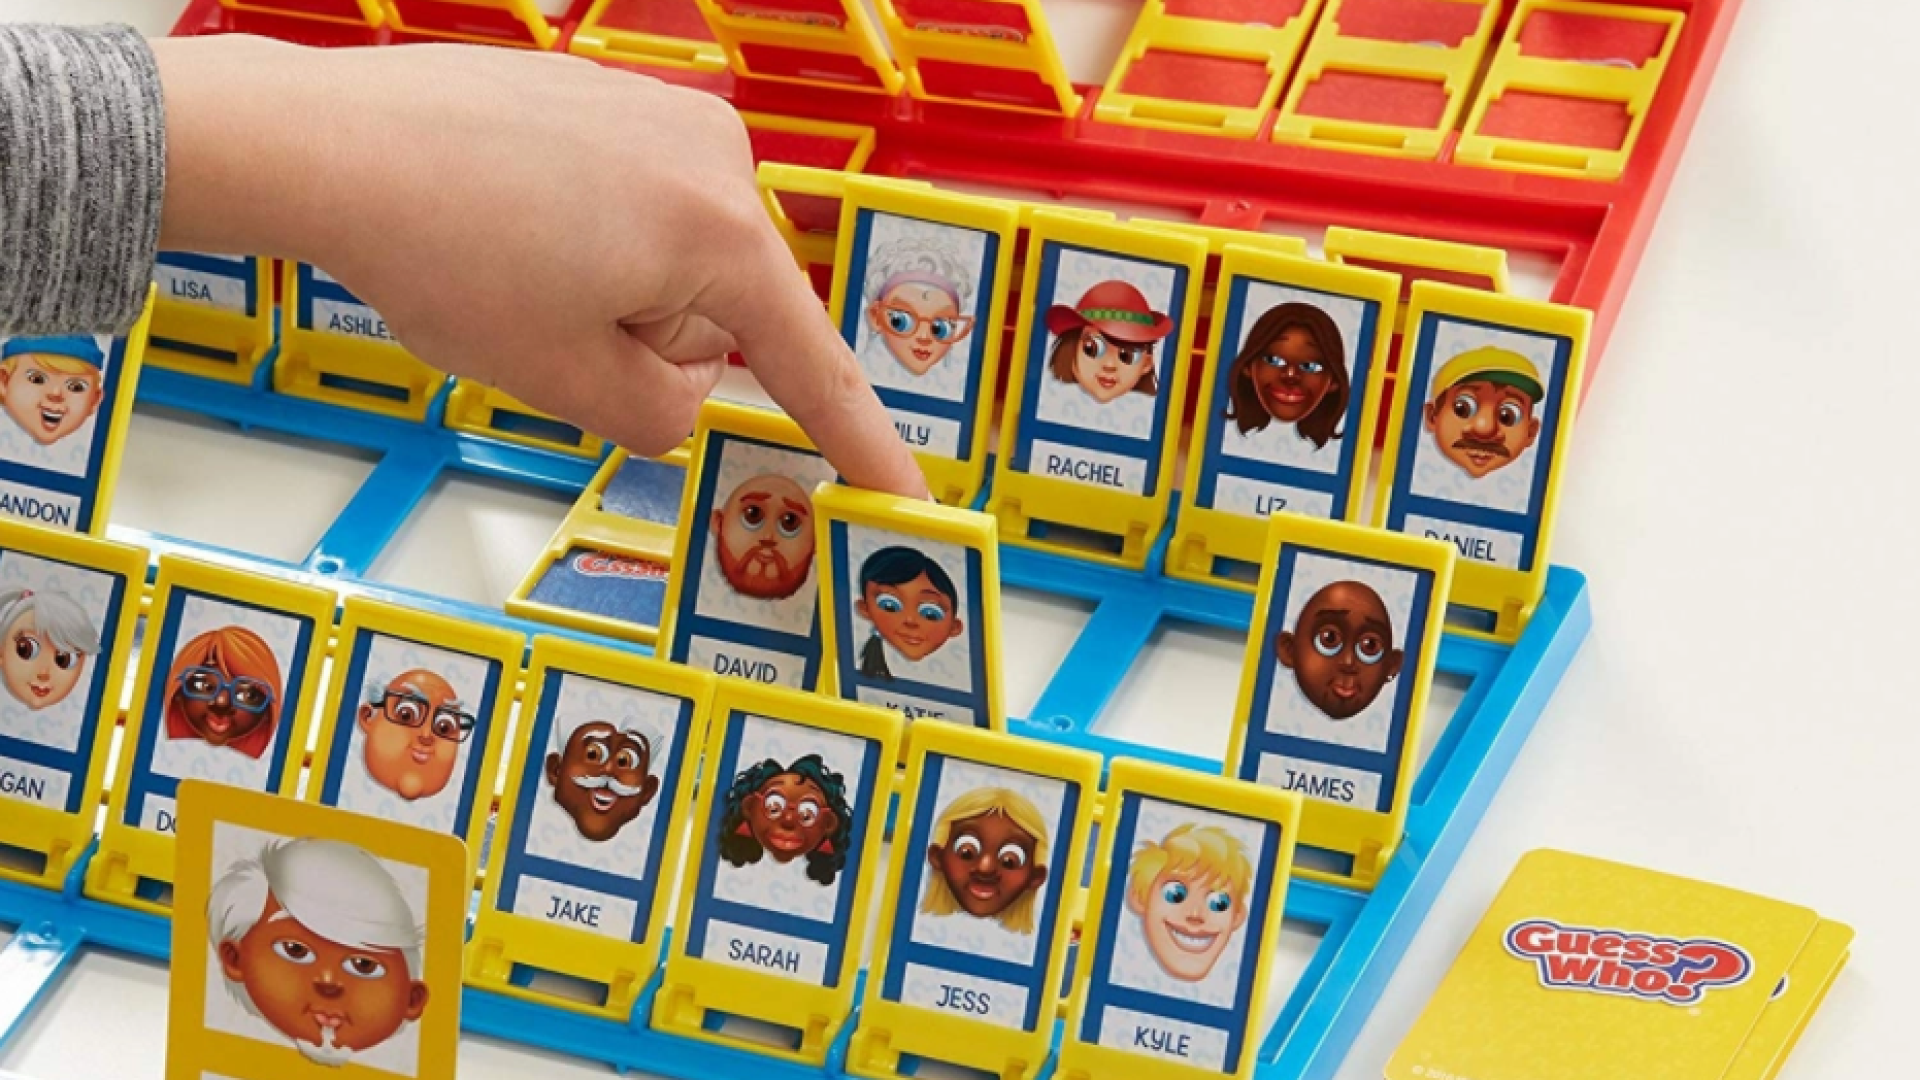 Image for Classic board game Guess Who? is being adapted into a television game show